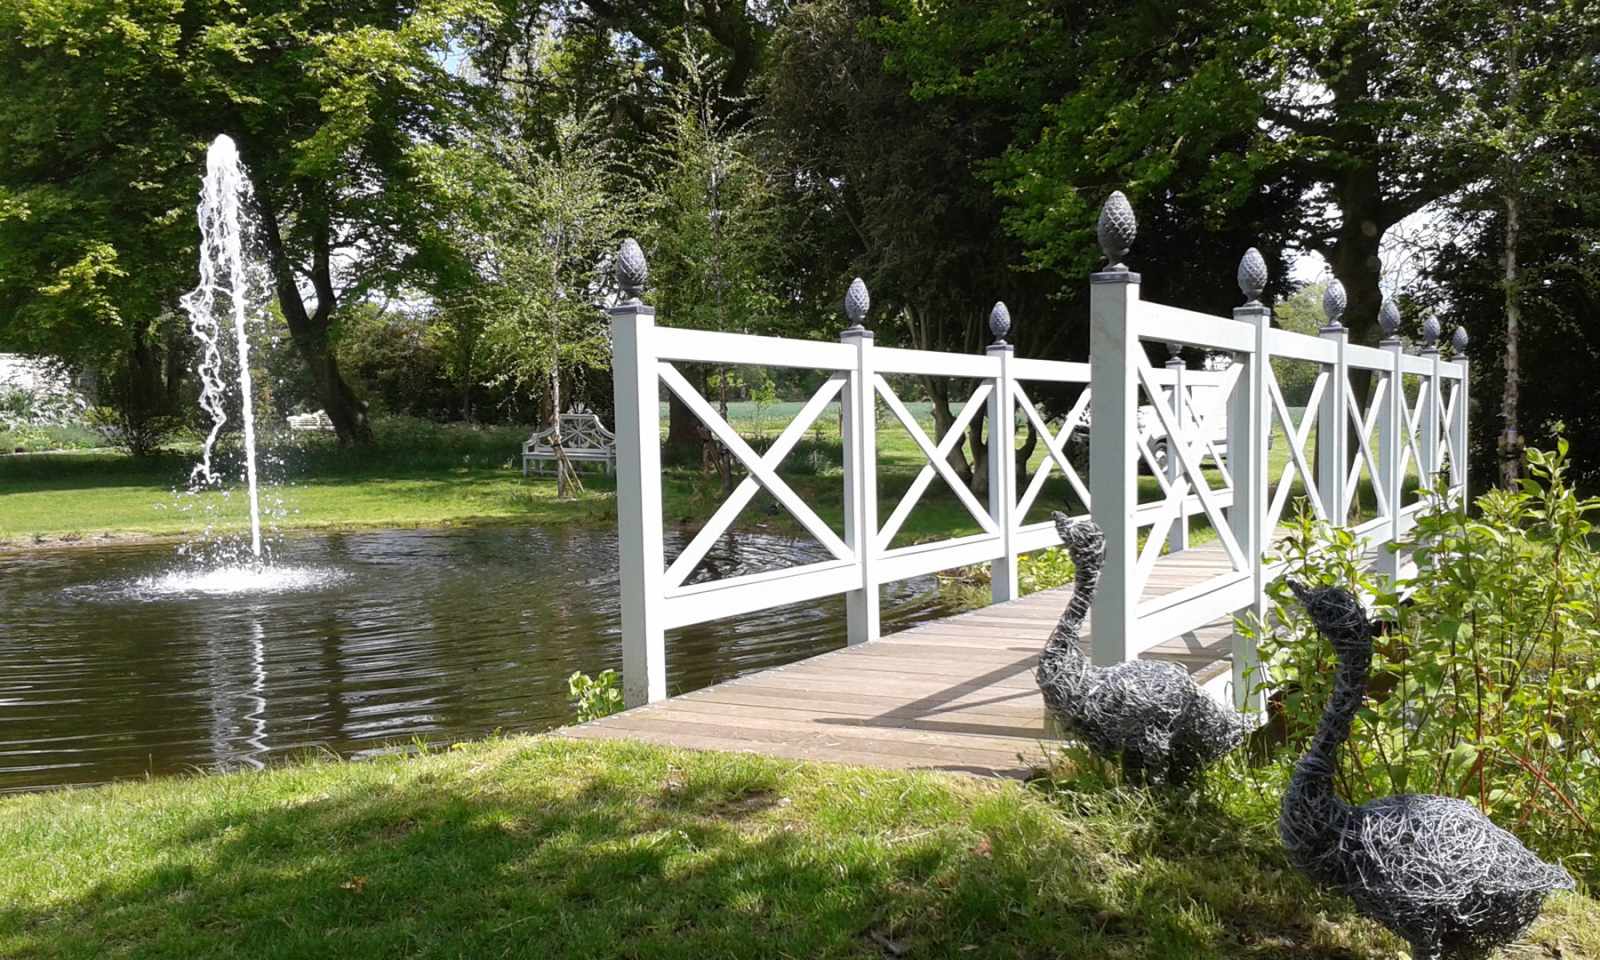 5 Garden Bridges You'll Want for Your Own Home